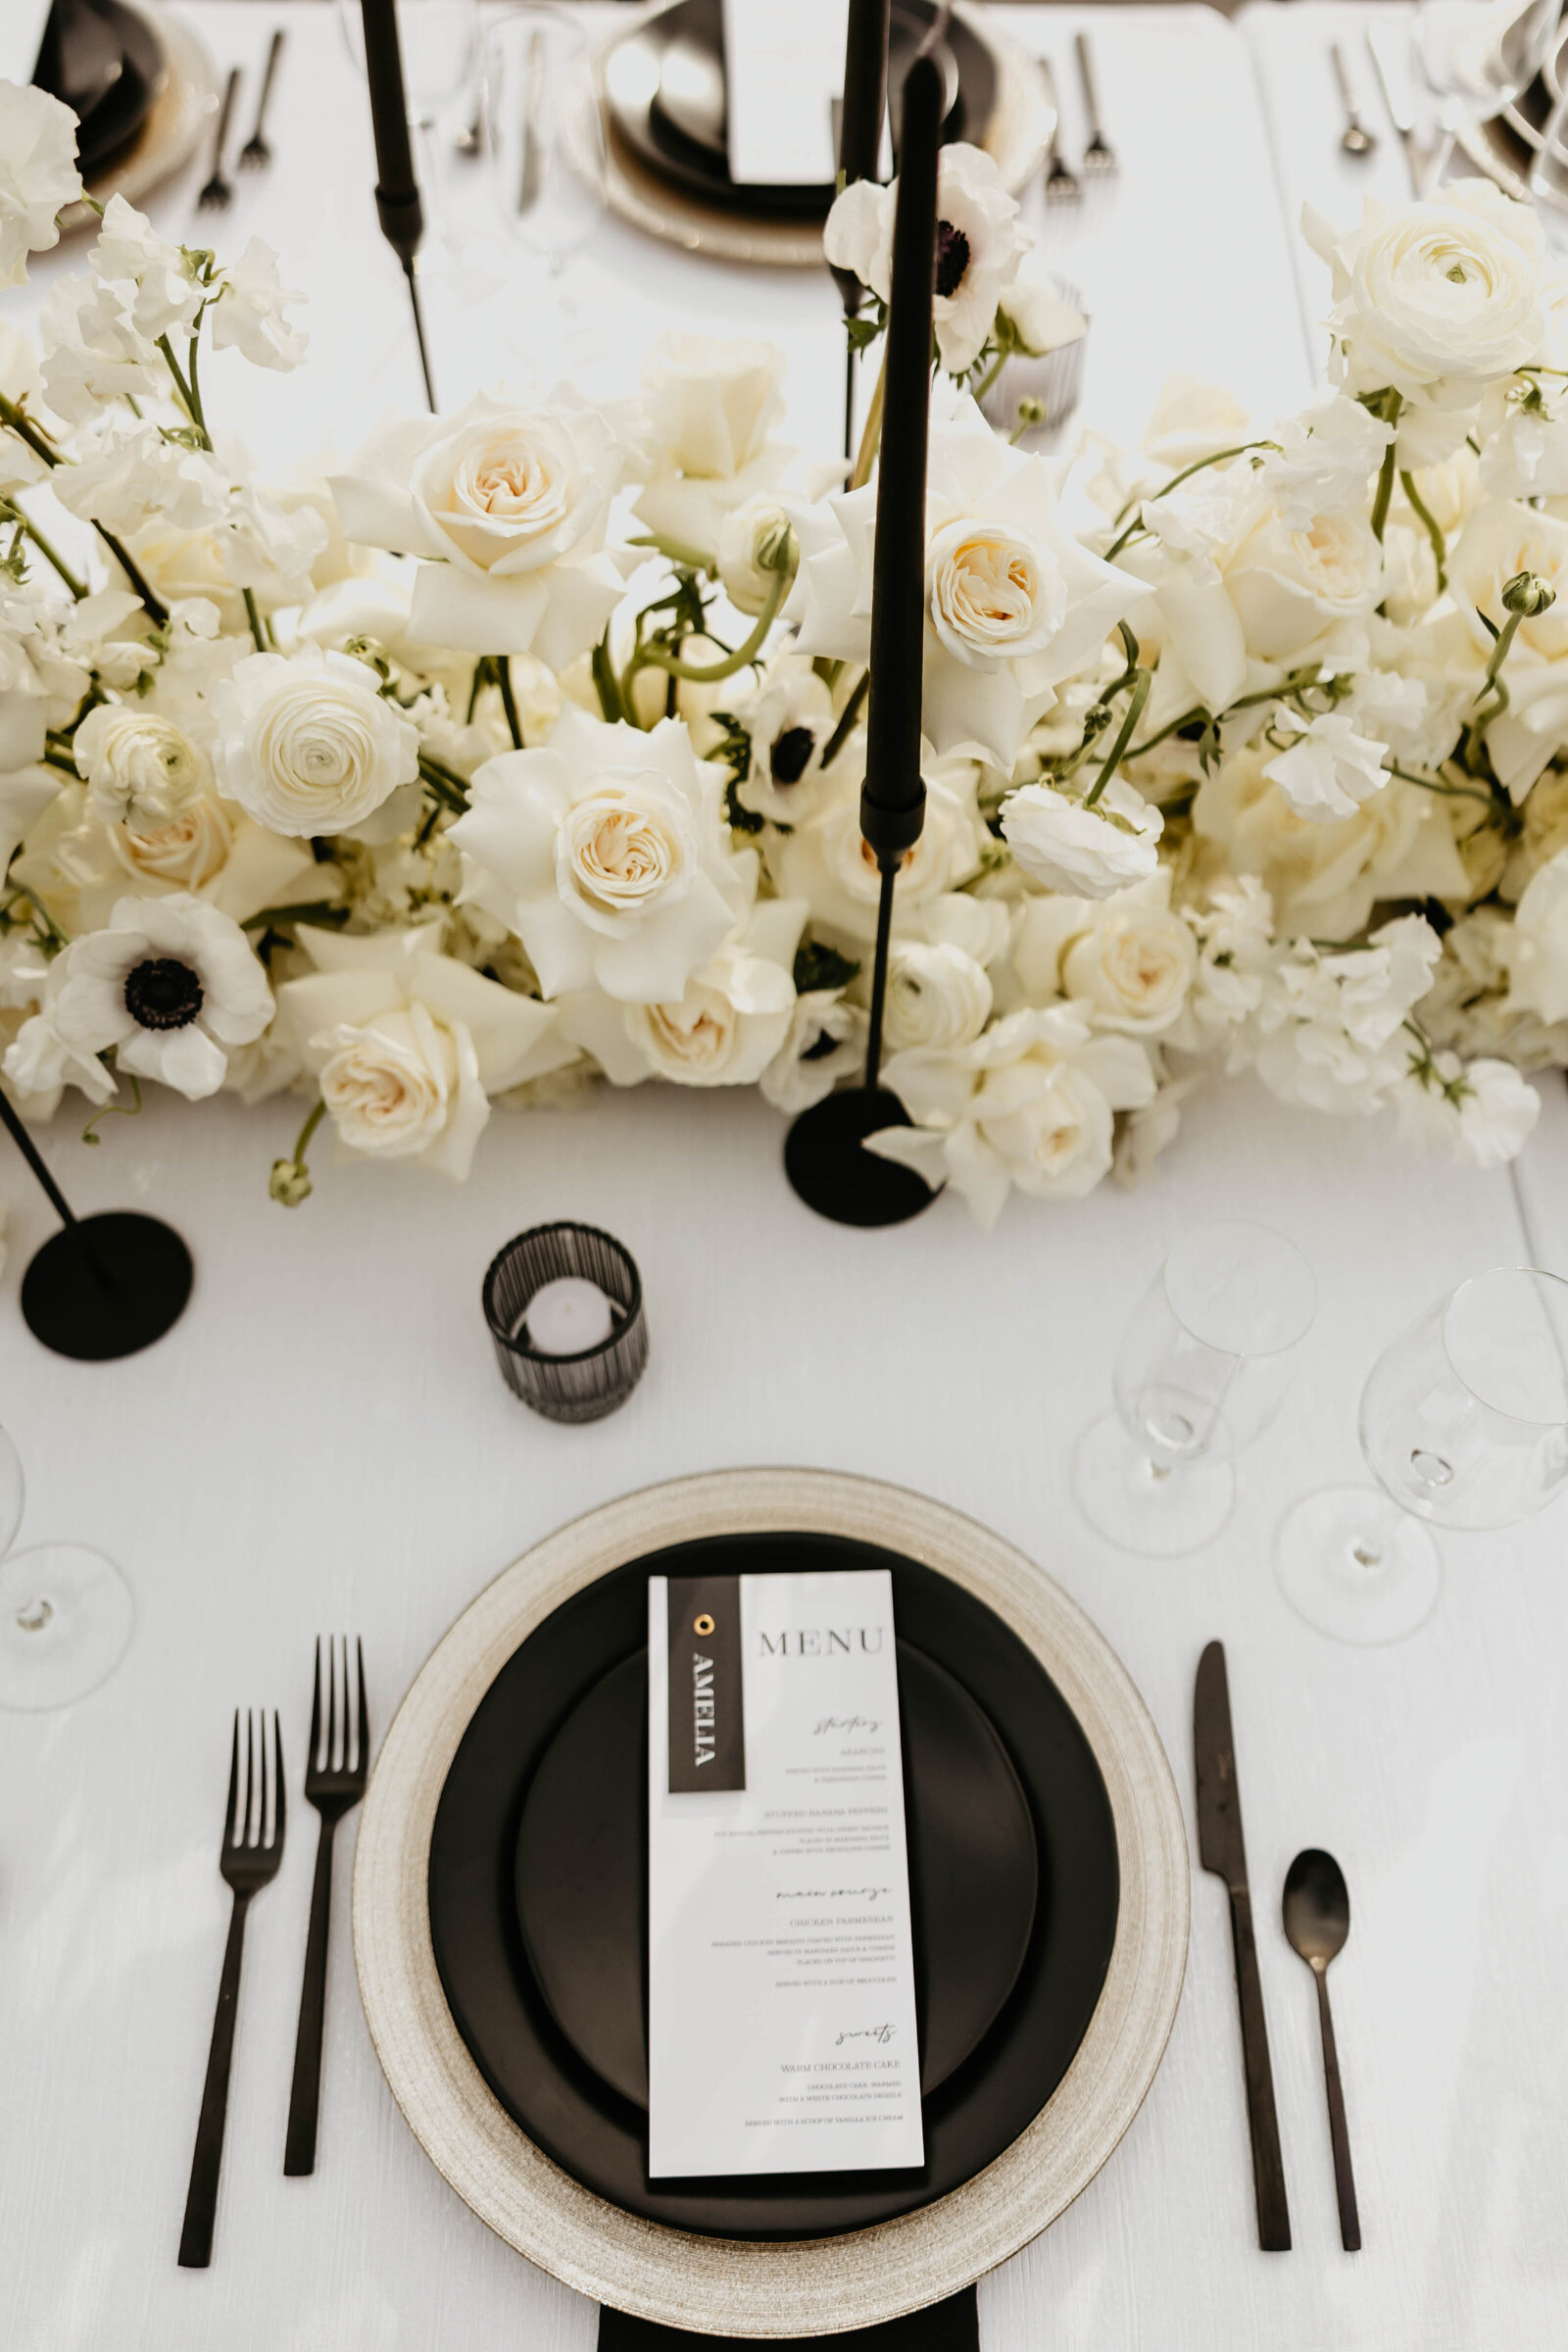 Black and white wedding table scape with modern menu cards and white floral arrangement - Simply Bold Events, luxury wedding planner